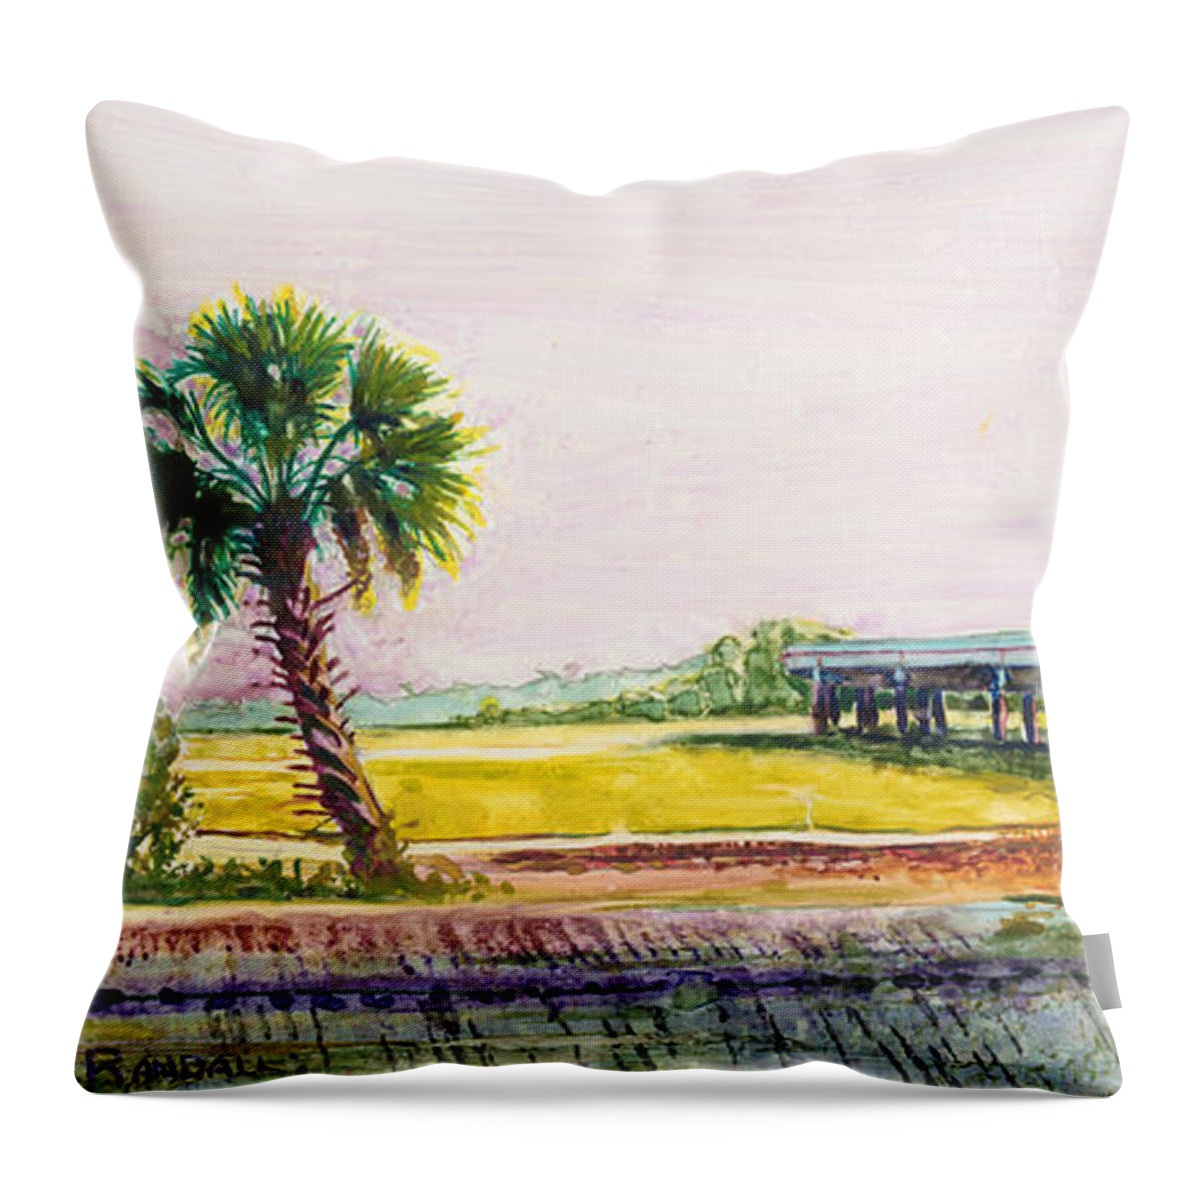 Flyover Throw Pillow featuring the painting Palmetto Flyover by David Randall